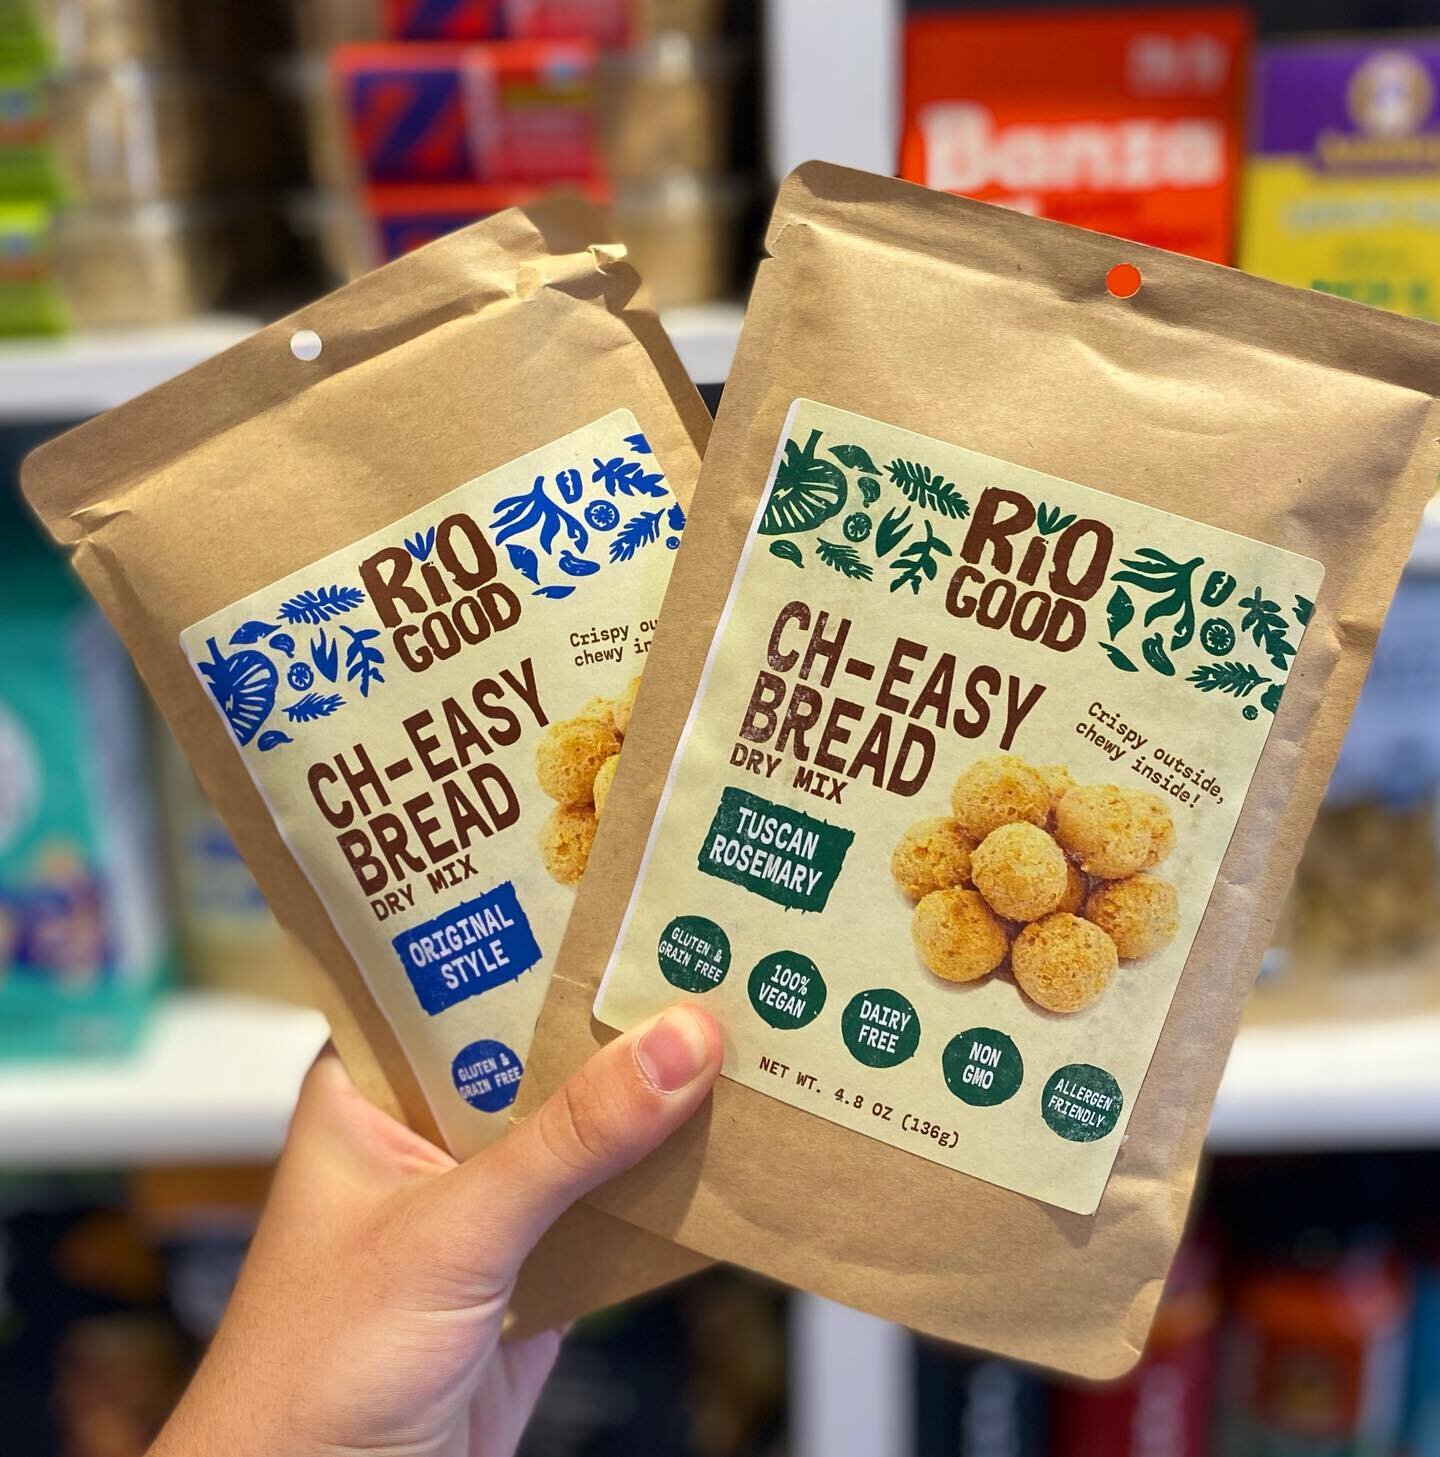 HEY NEW YORK! 👋🗽
Ch-easy bread is NOW at the VEGAN deli and market @orchardgrocer! 🥳
New Yorkers, grab a bag of Ch-easy bread...and some vegan soft serve while you're there! 🧀🍦

#plantbased #plantbasedfood #soyfree #glutenfree  #ecofriendly #eco